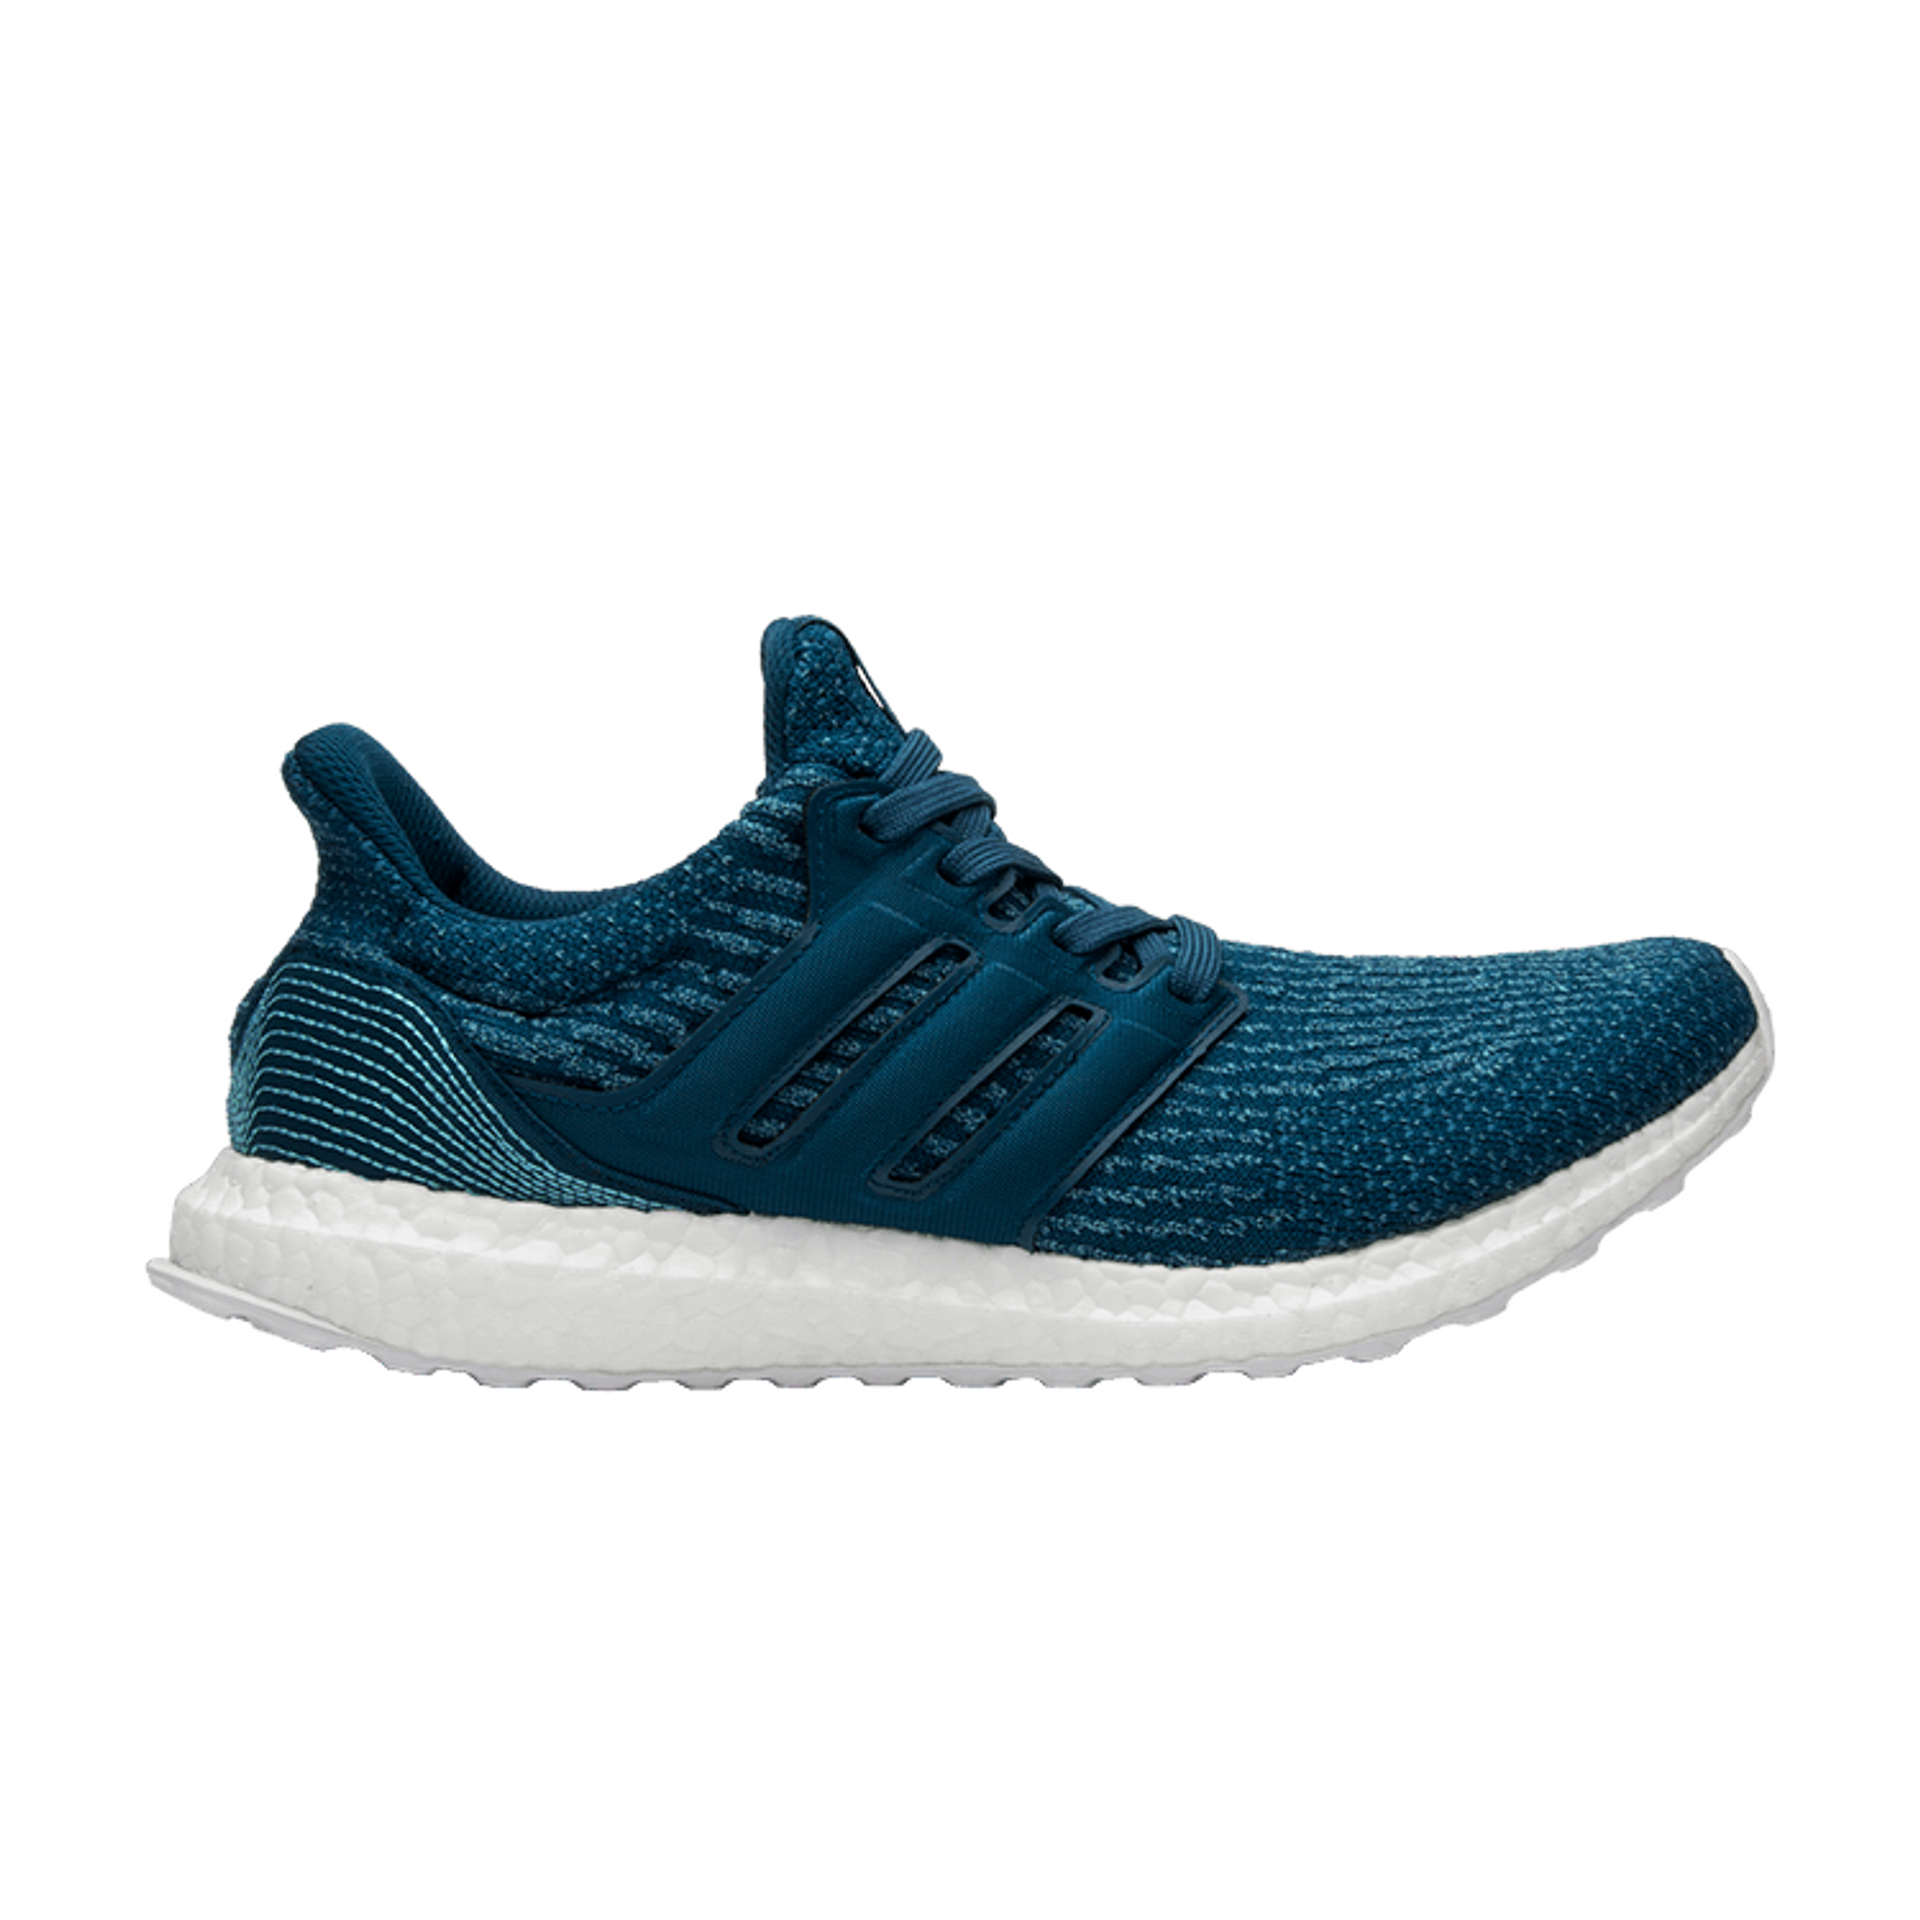 Parley x UltraBoost 3.0 Limited 'Night Navy'